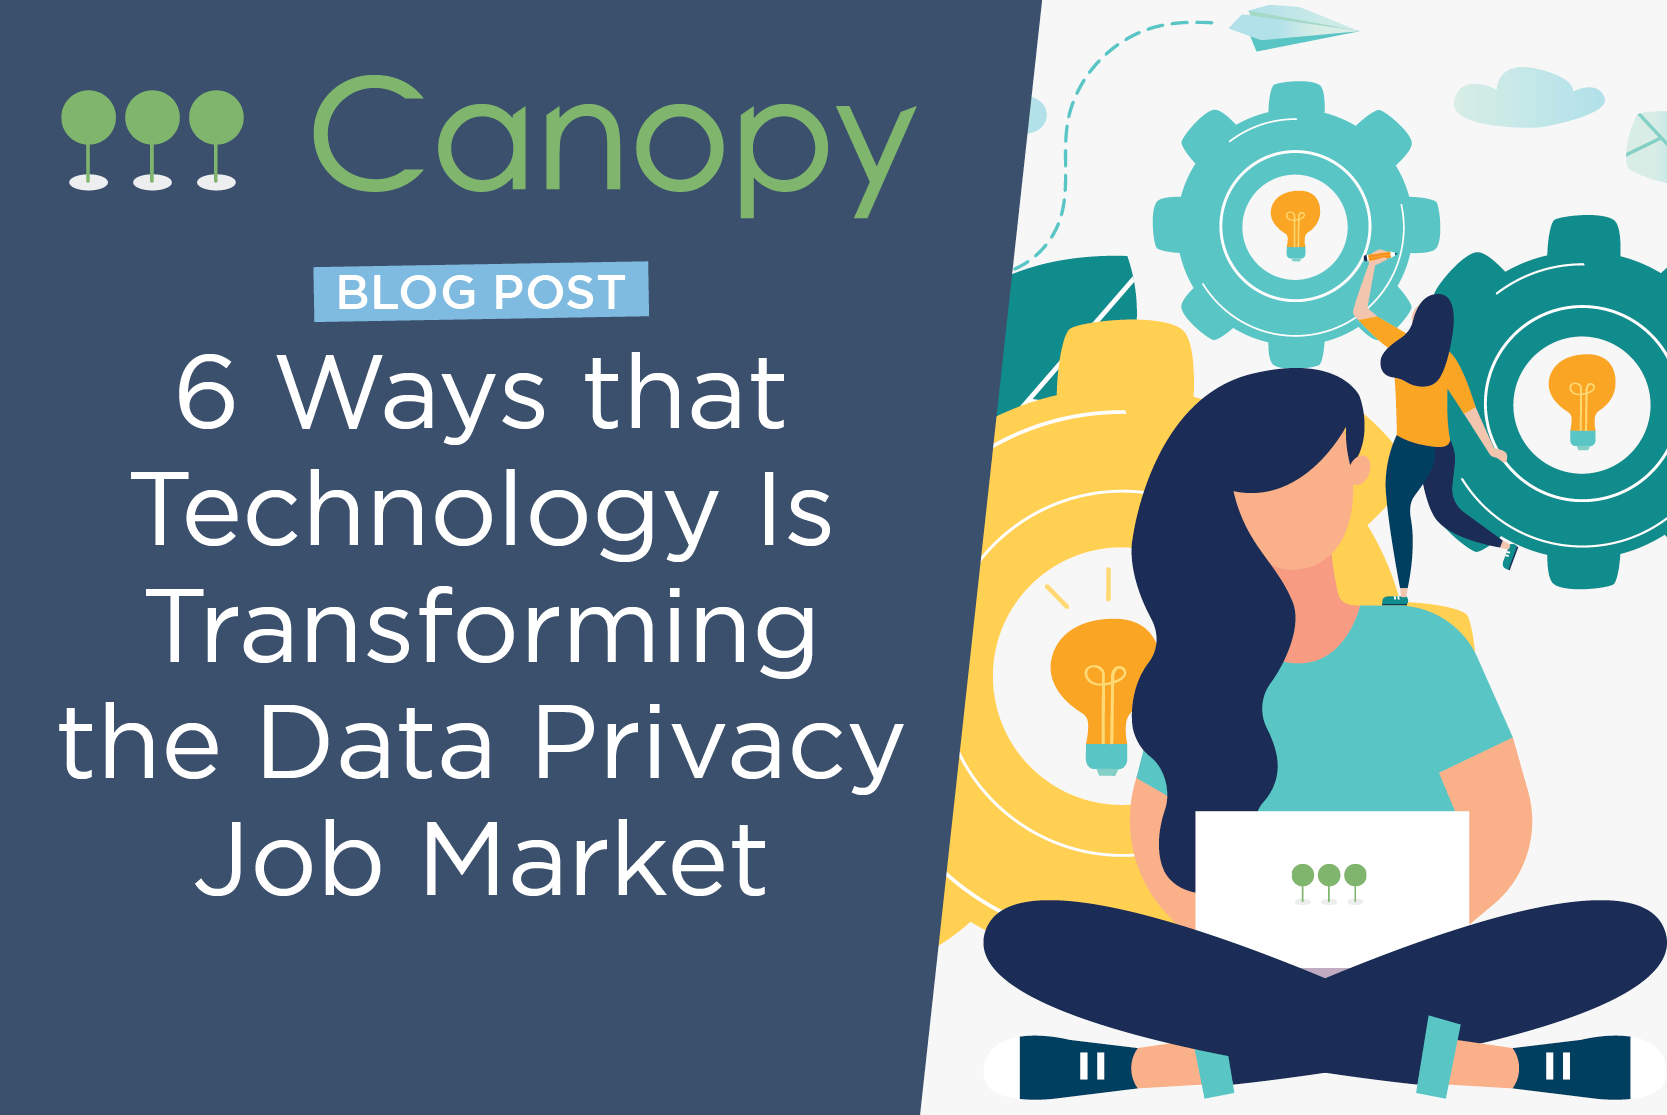 woman working on computer with canopy logo and text: 6 ways that technology is transforming the data privacy job market